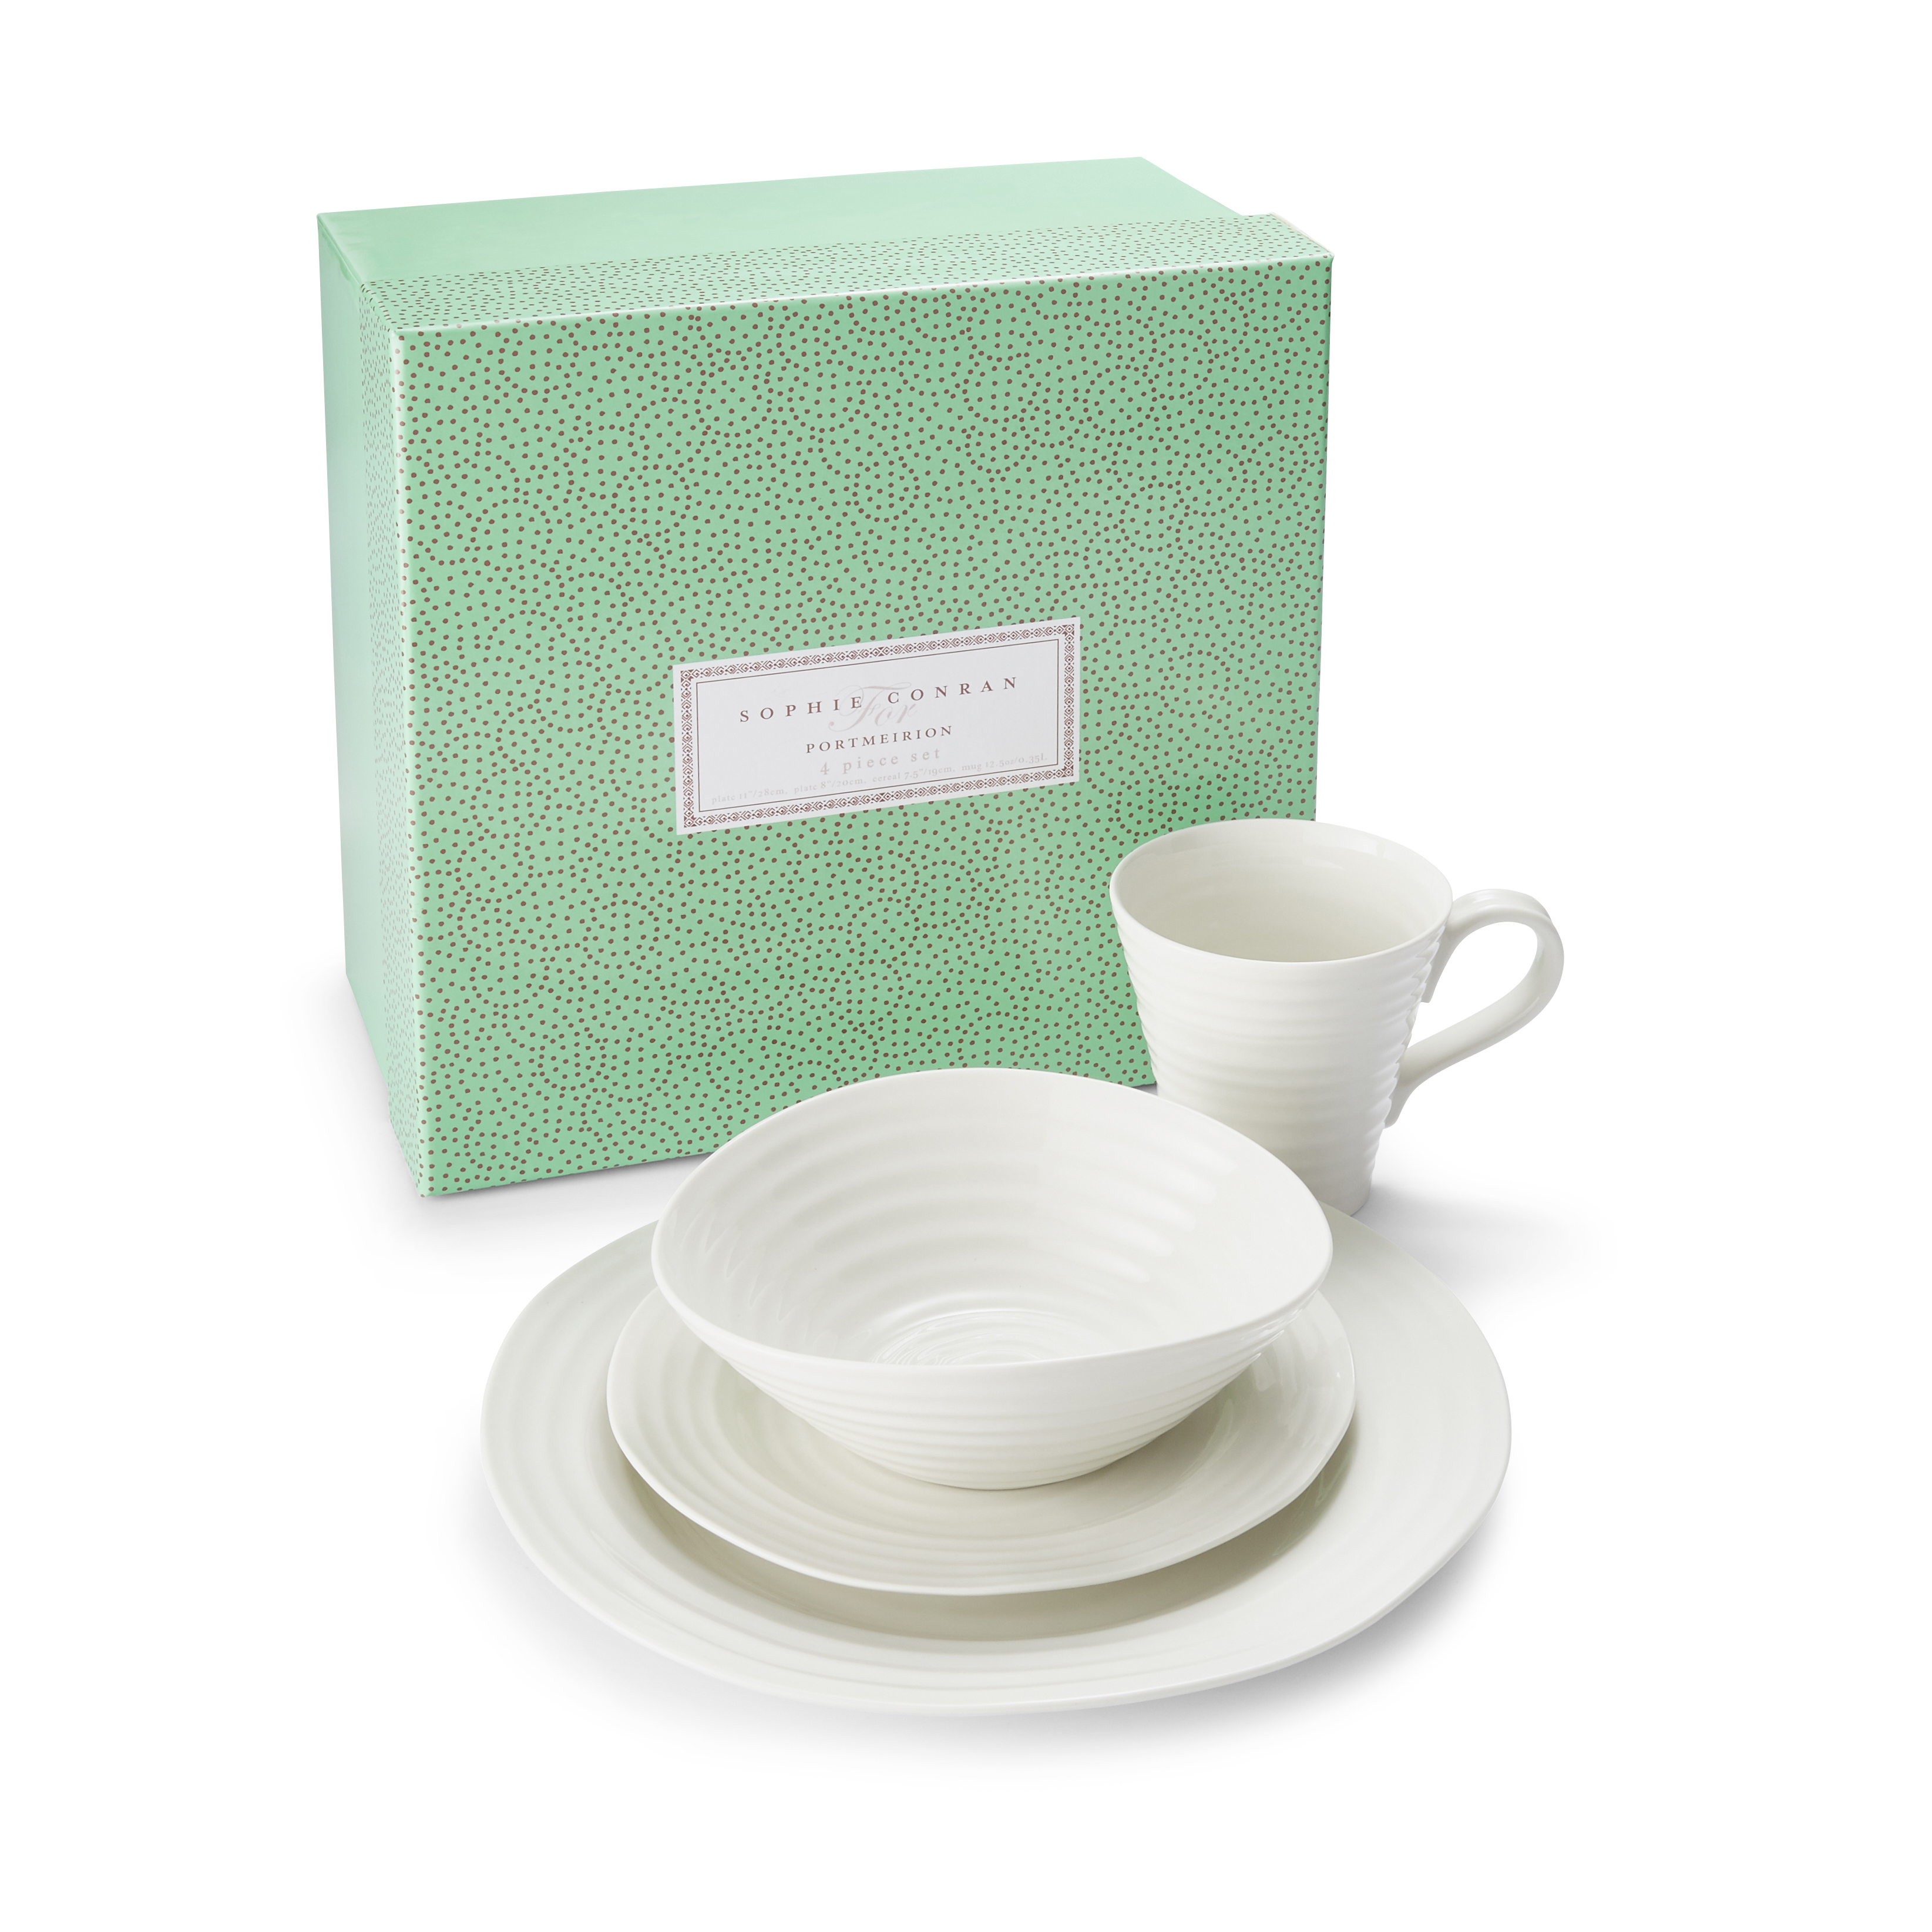 Sophie Conran White 4 Piece Place Setting image number null